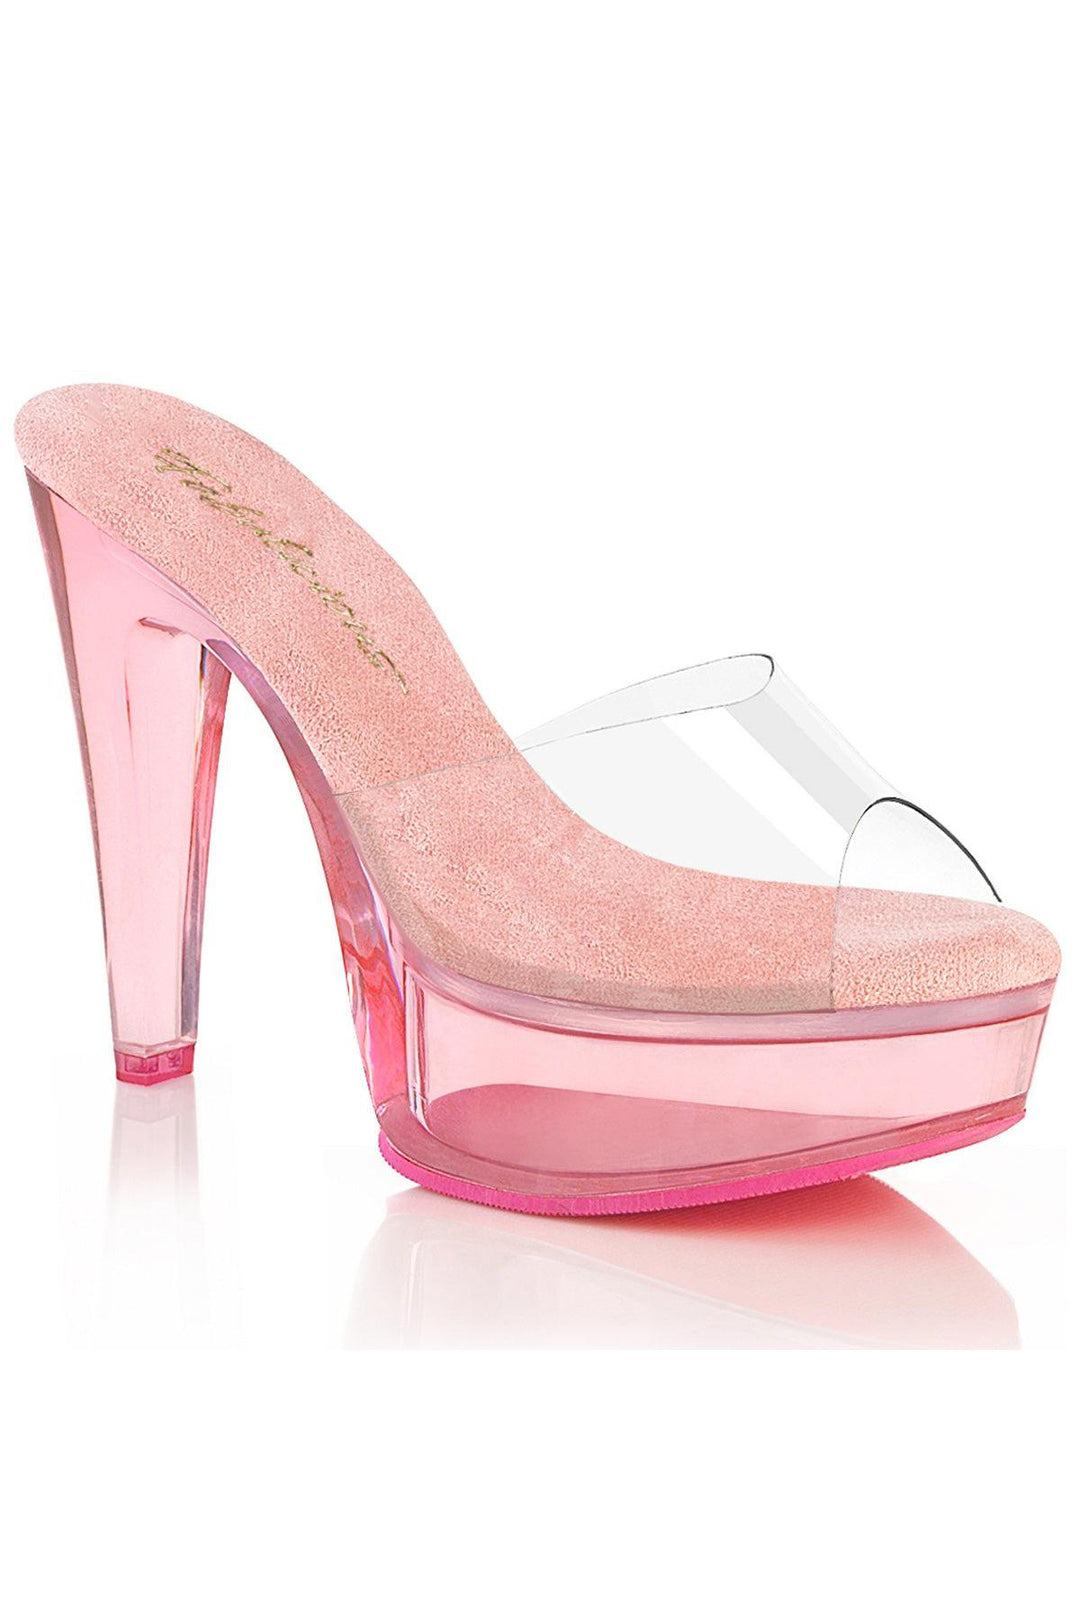 Fabulicious Clear Slides Platform Stripper Shoes | Buy at Sexyshoes.com